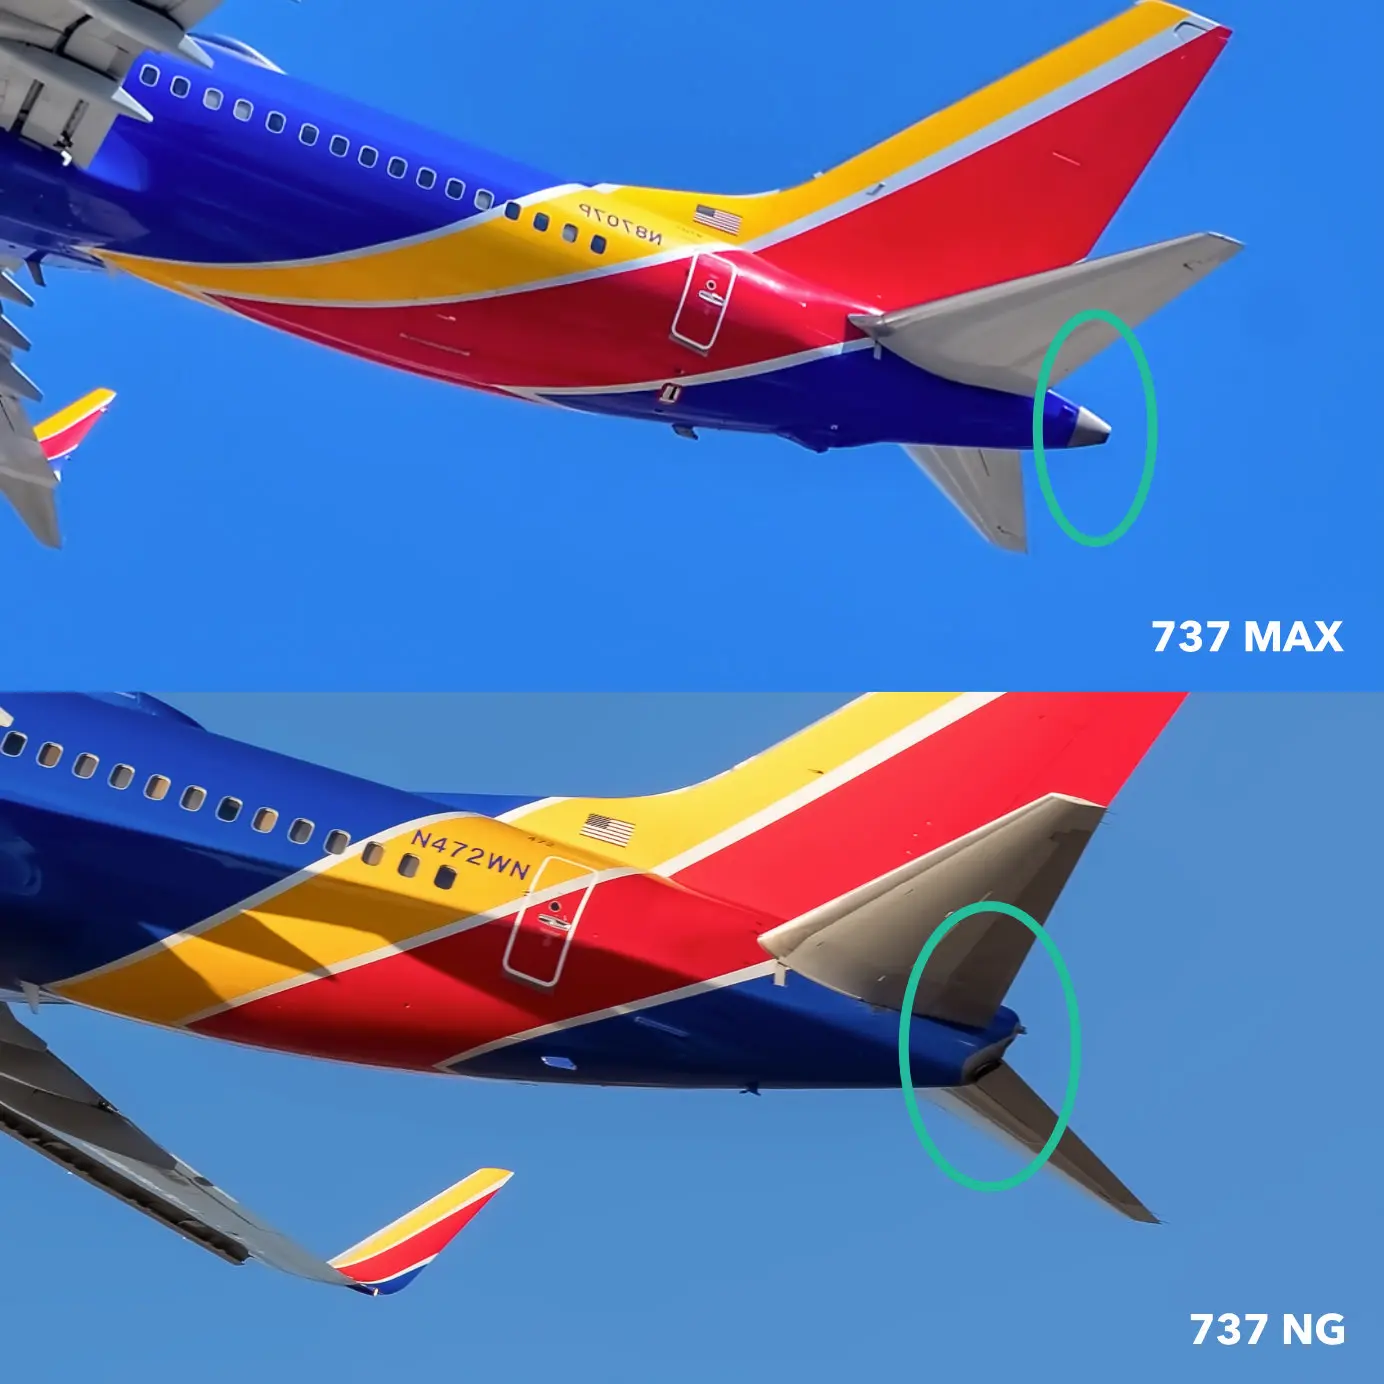 Difference between Boeing 737 MAX and 737 NG tail cone